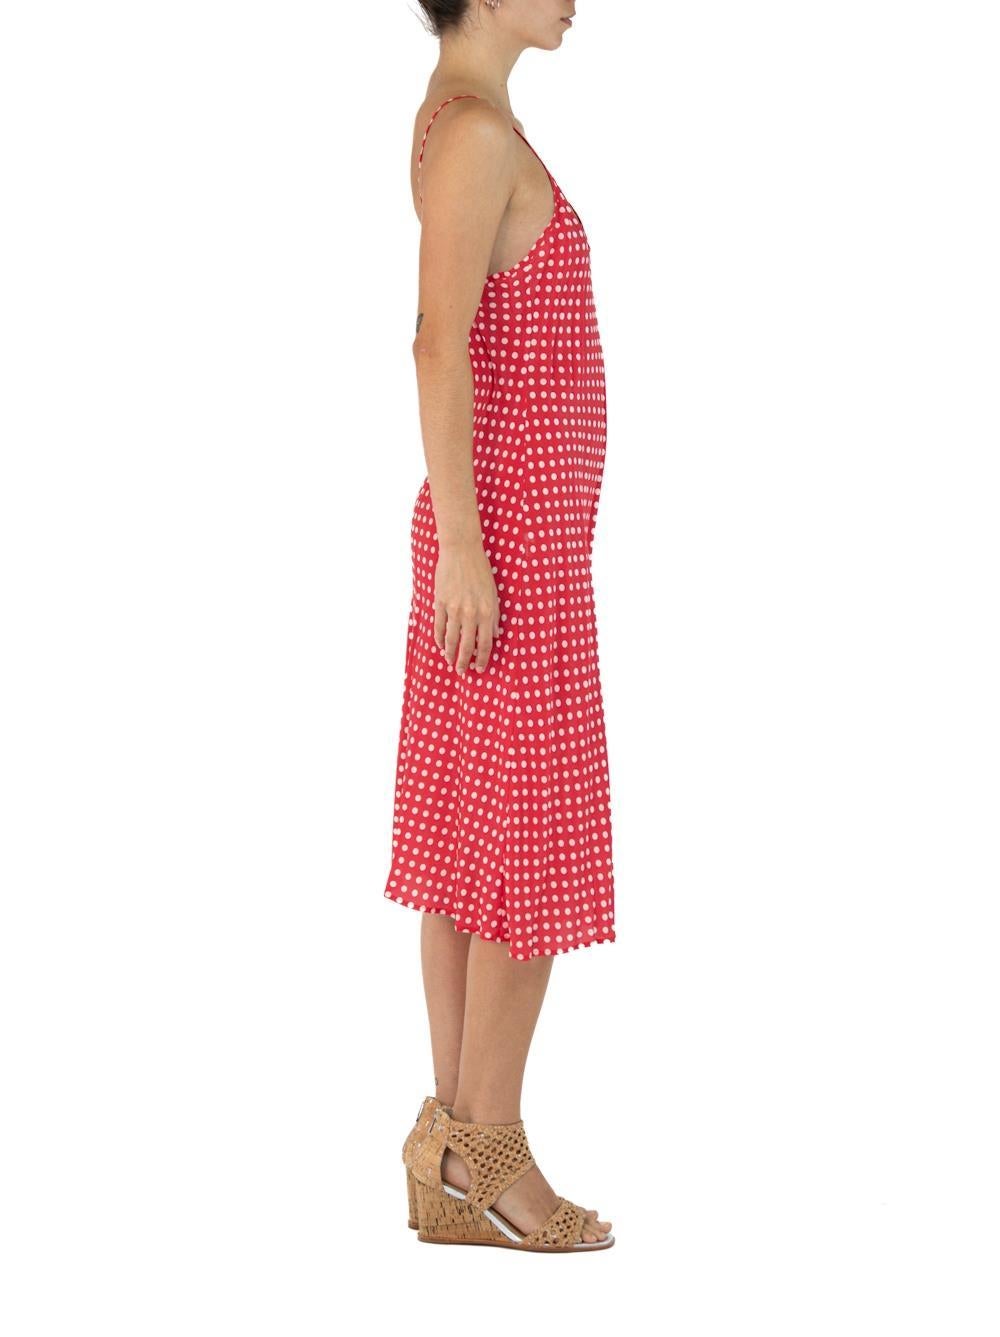 Morphew Collection Red & White Polka Dot Cold Rayon Bias  Slip Dress Master Med In Excellent Condition For Sale In New York, NY